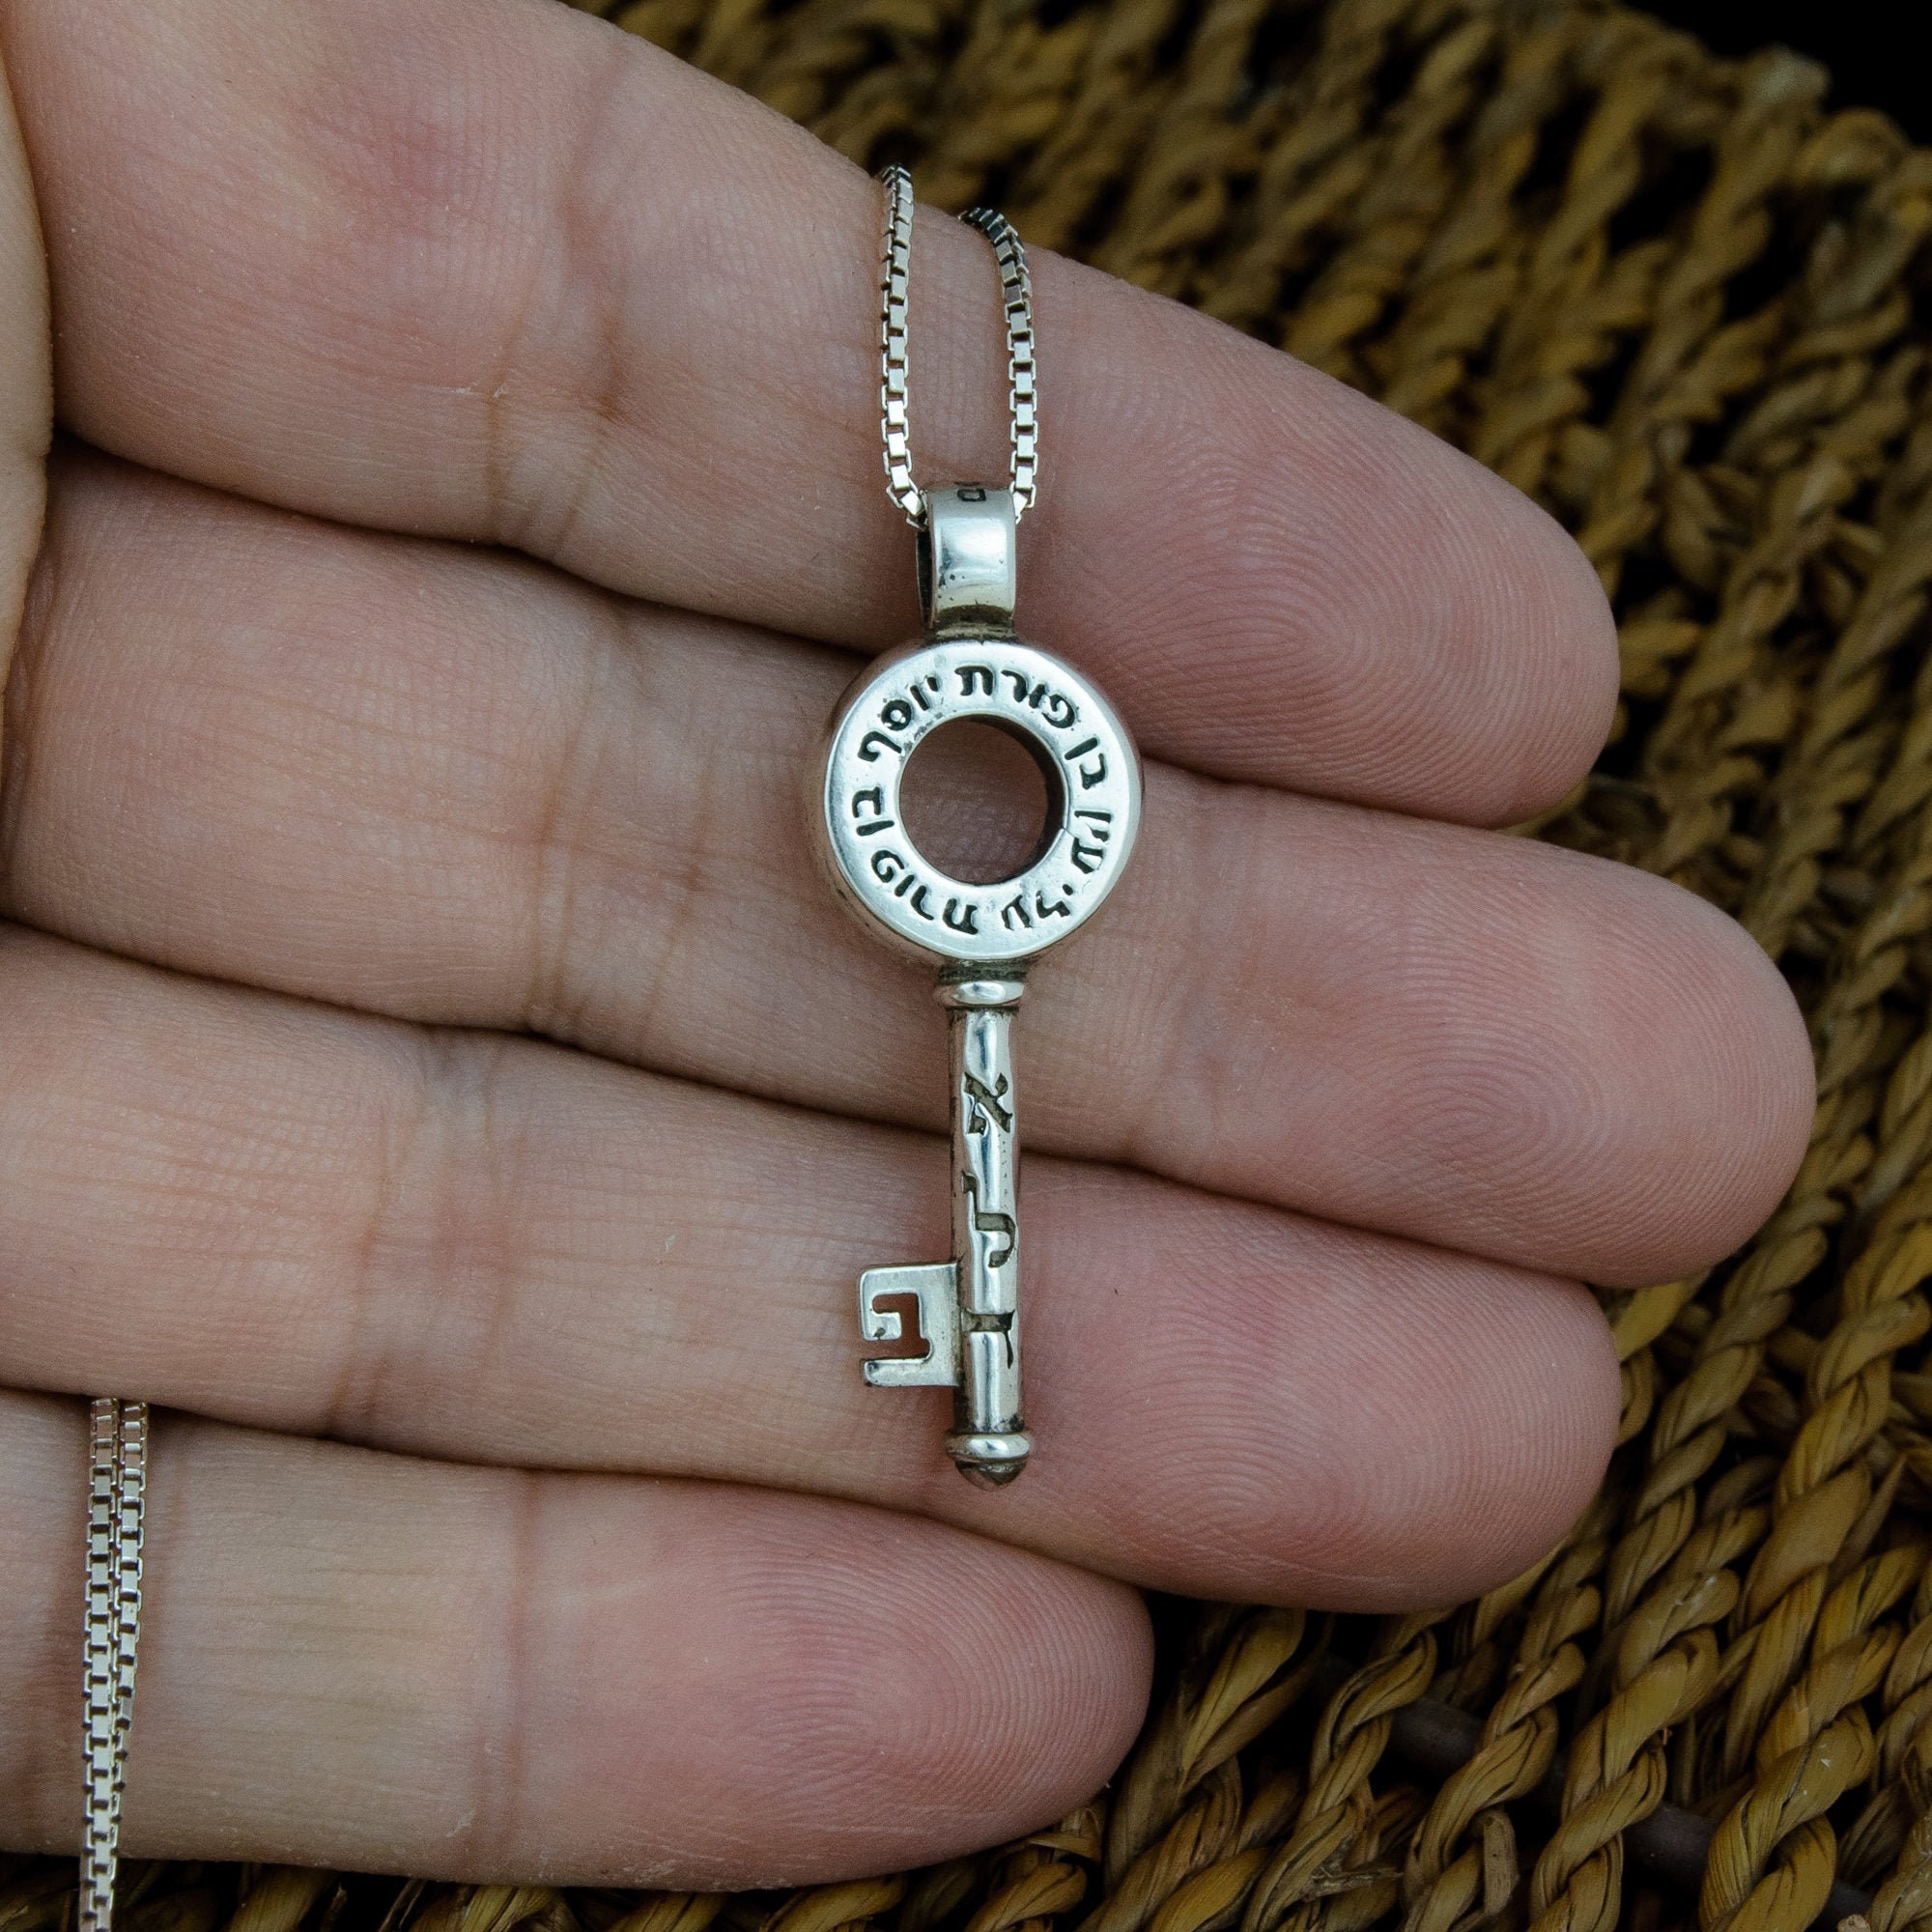 The Key Necklace - Sterling Silver